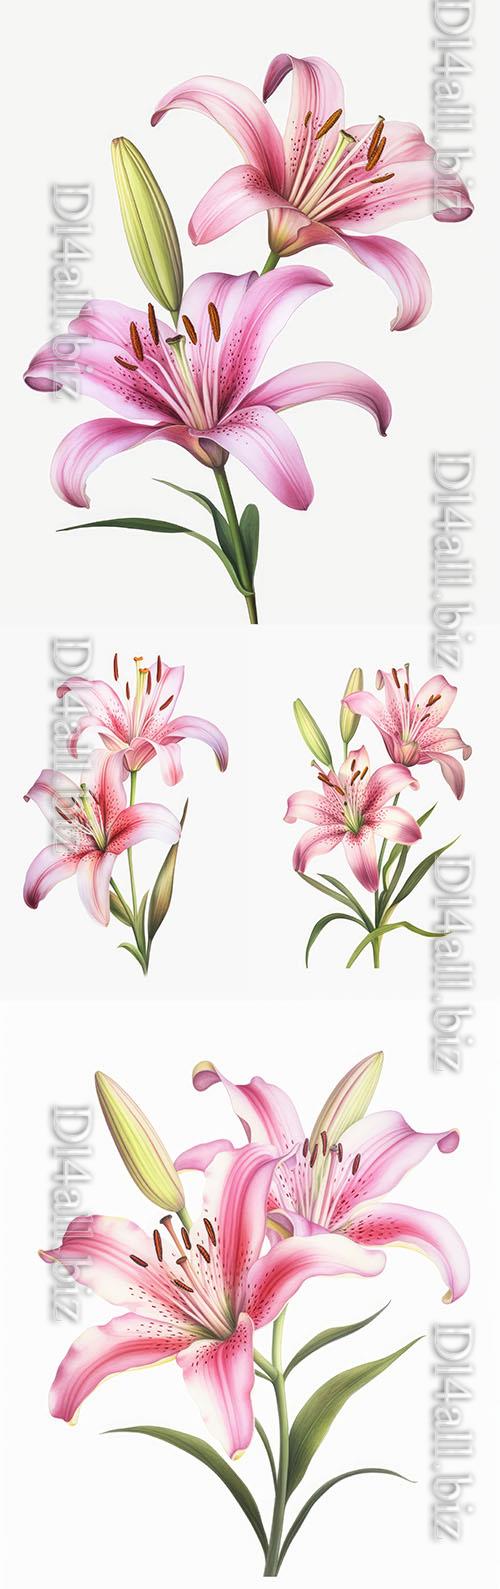 Photo picture of pink lily flowers on white background